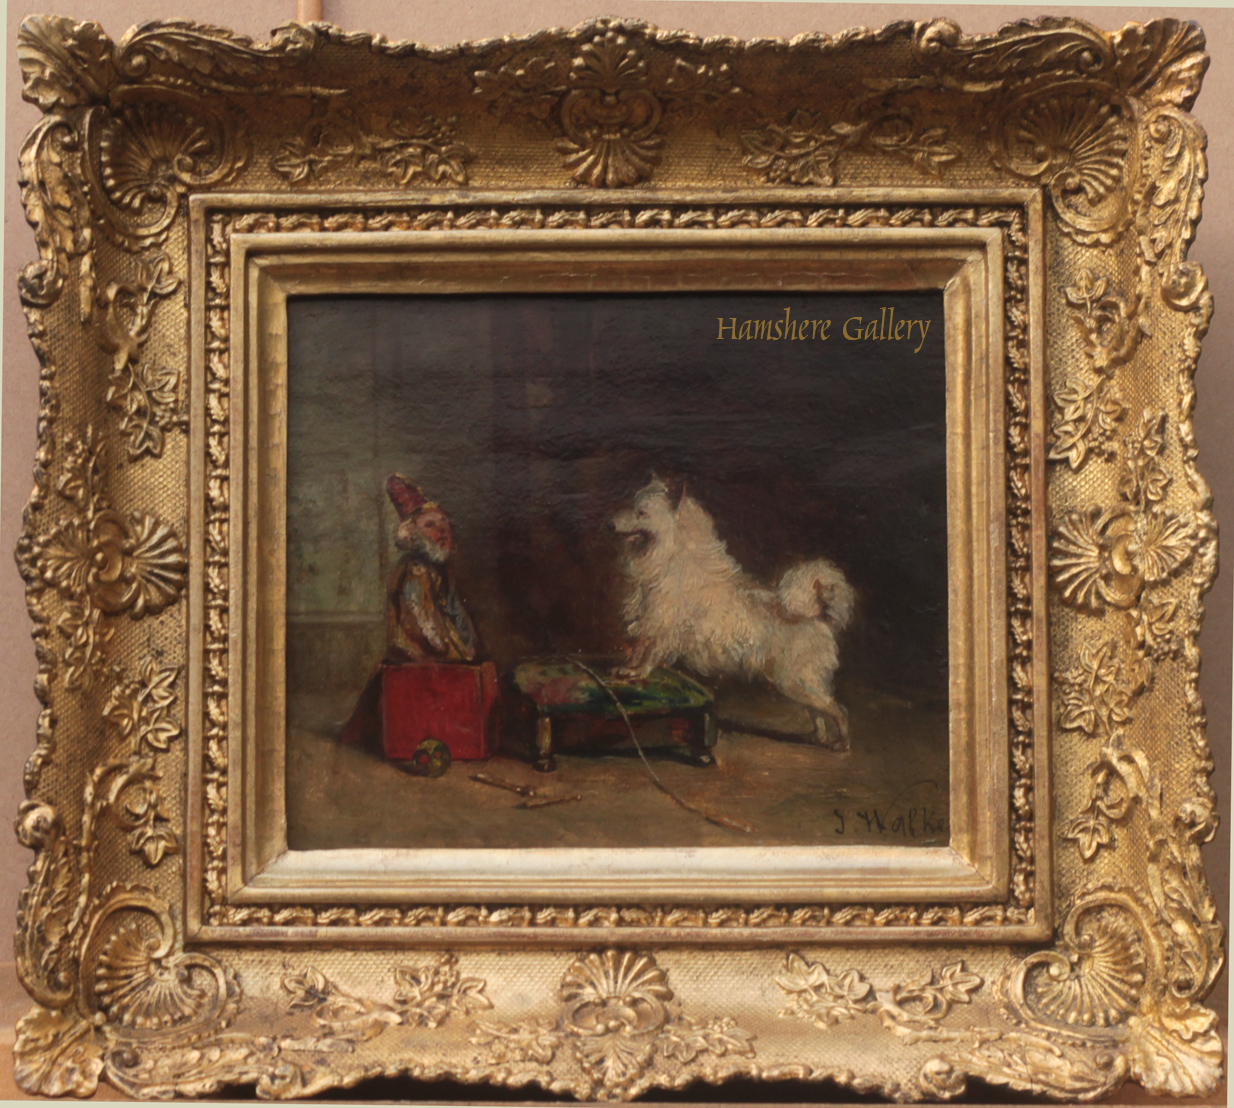 Click for larger image: Oil of a Spitz amused by a jack-in-the-box by James Alexander Walker - Oil of a Spitz amused by a jack-in-the-box by James Alexander Walker